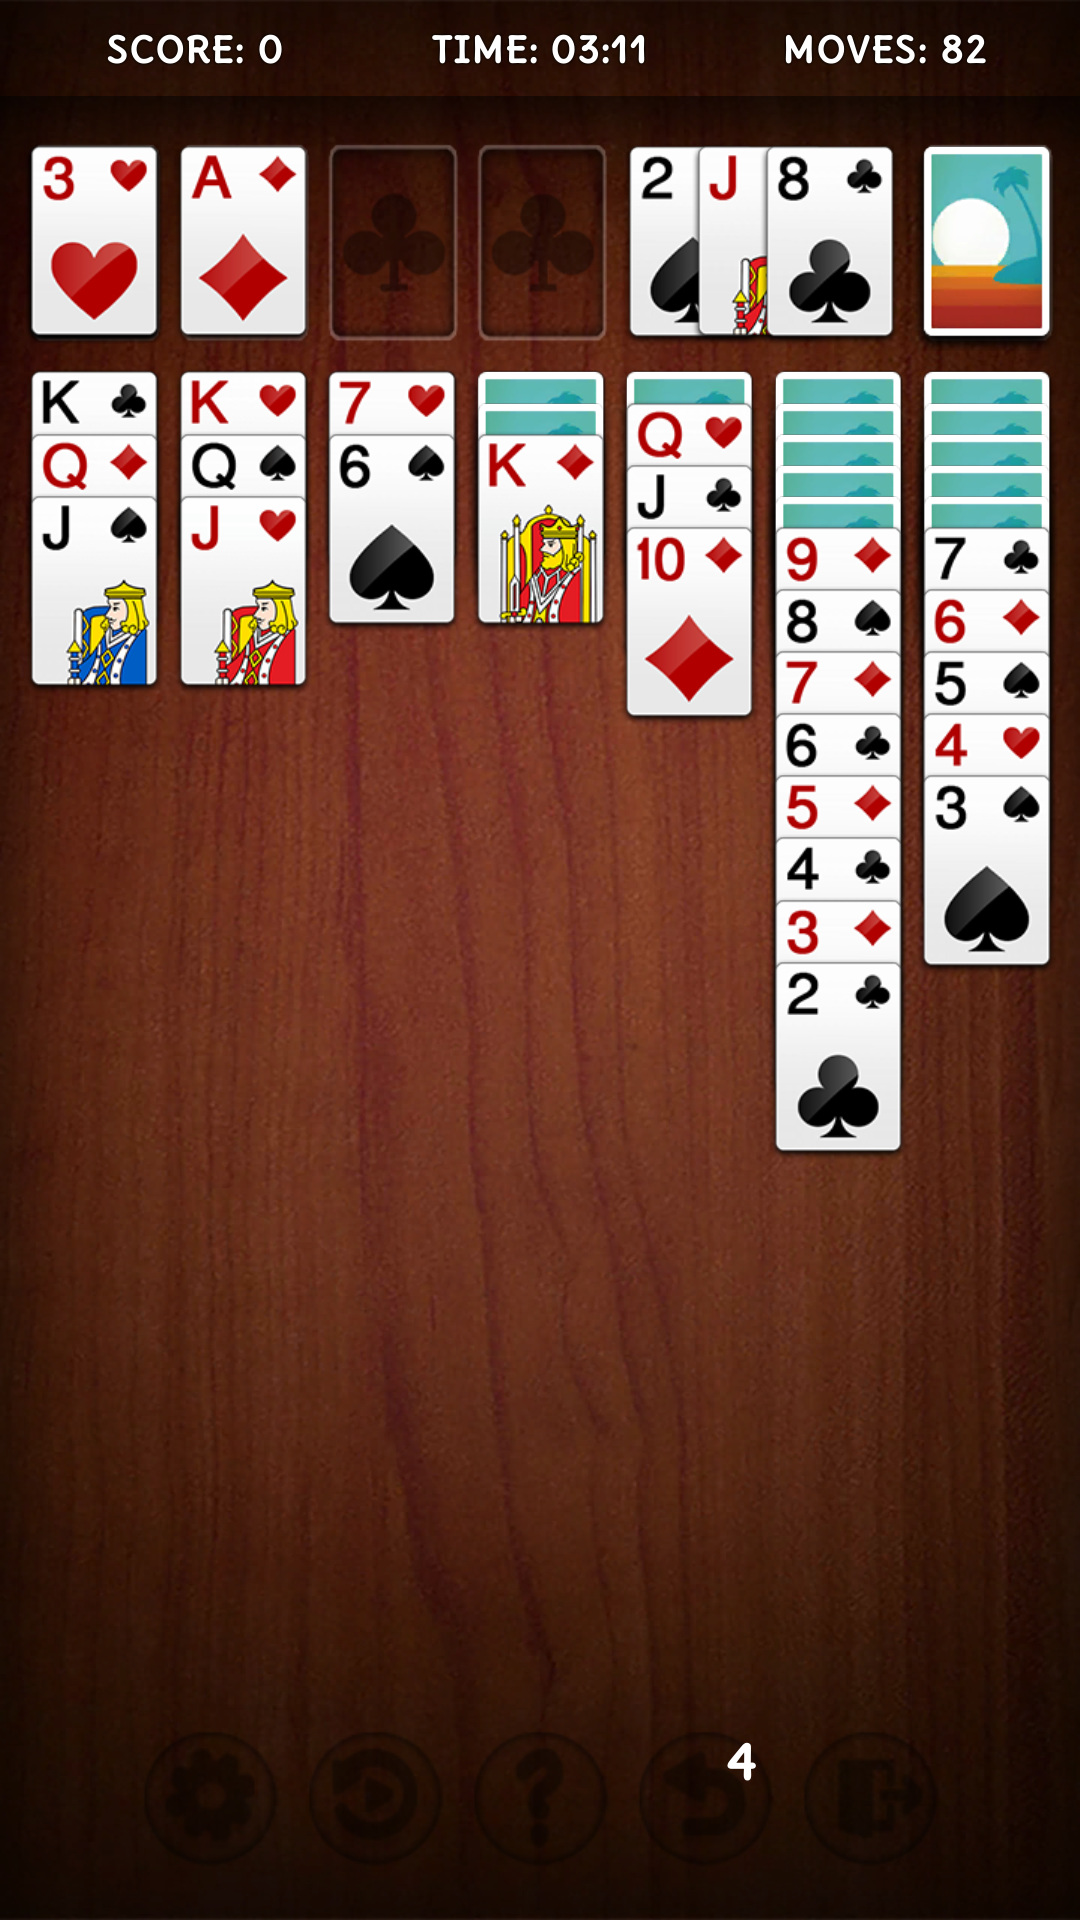 CardKing Solitaire screenshot game